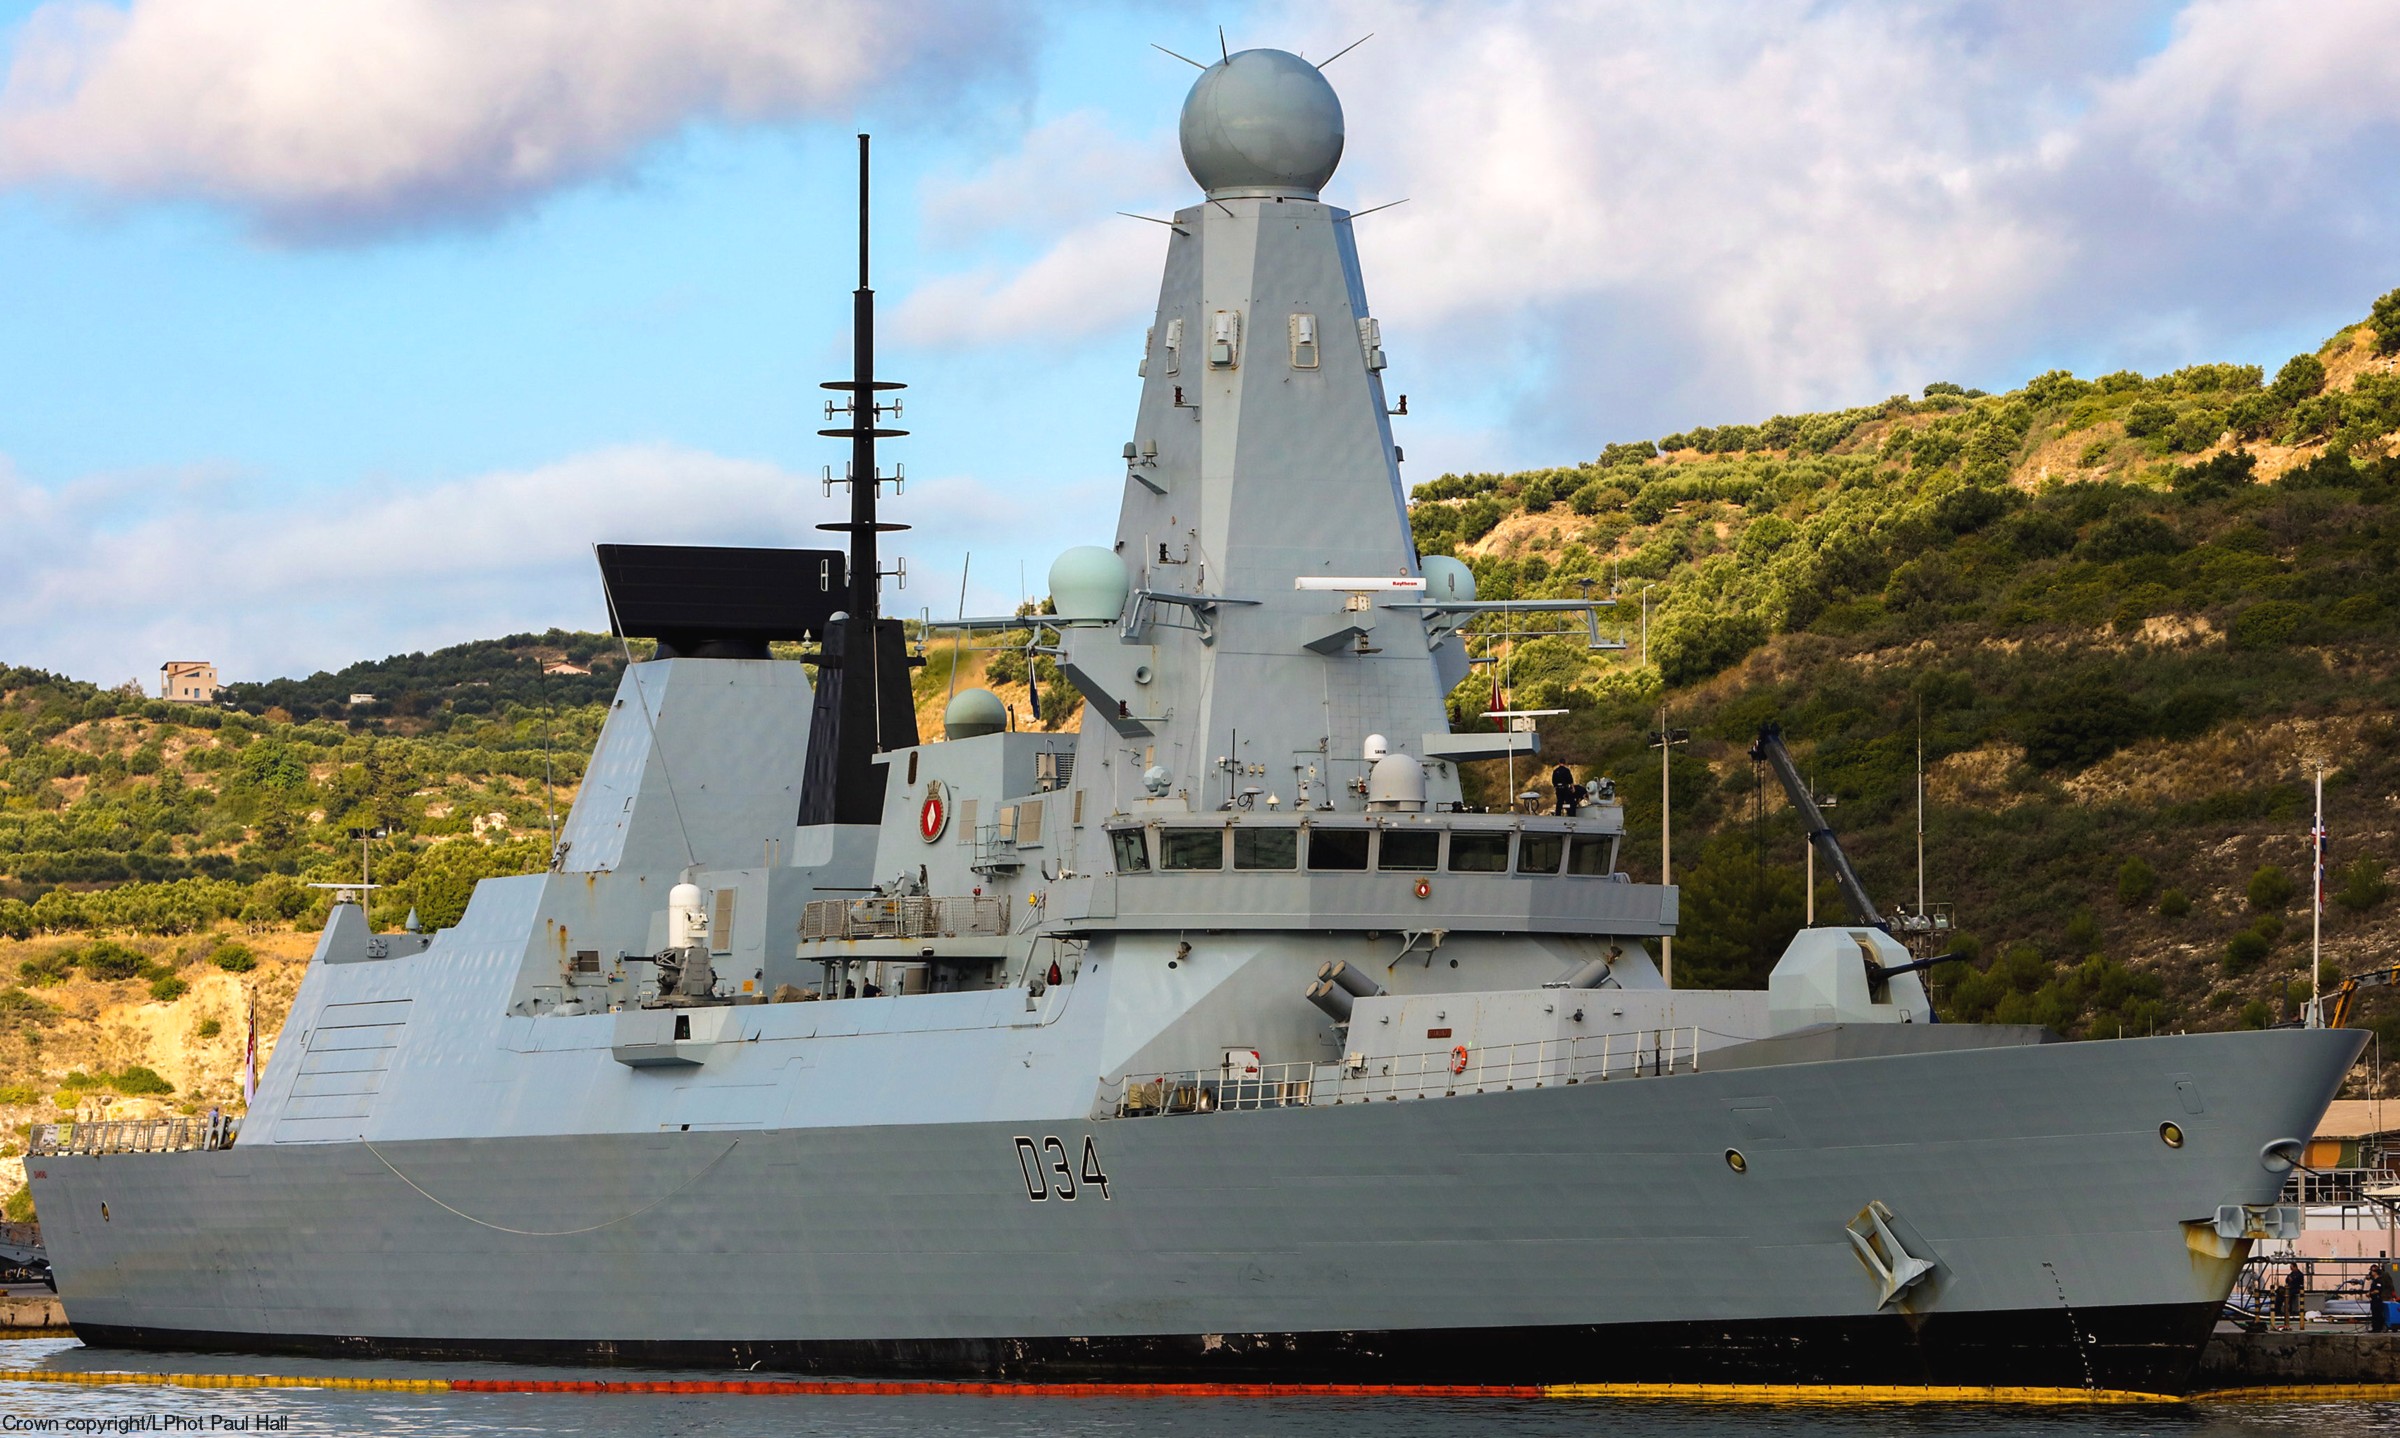 d34 hms diamond d-34 type 45 daring class guided missile destroyer ddg royal navy sea viper paams 50